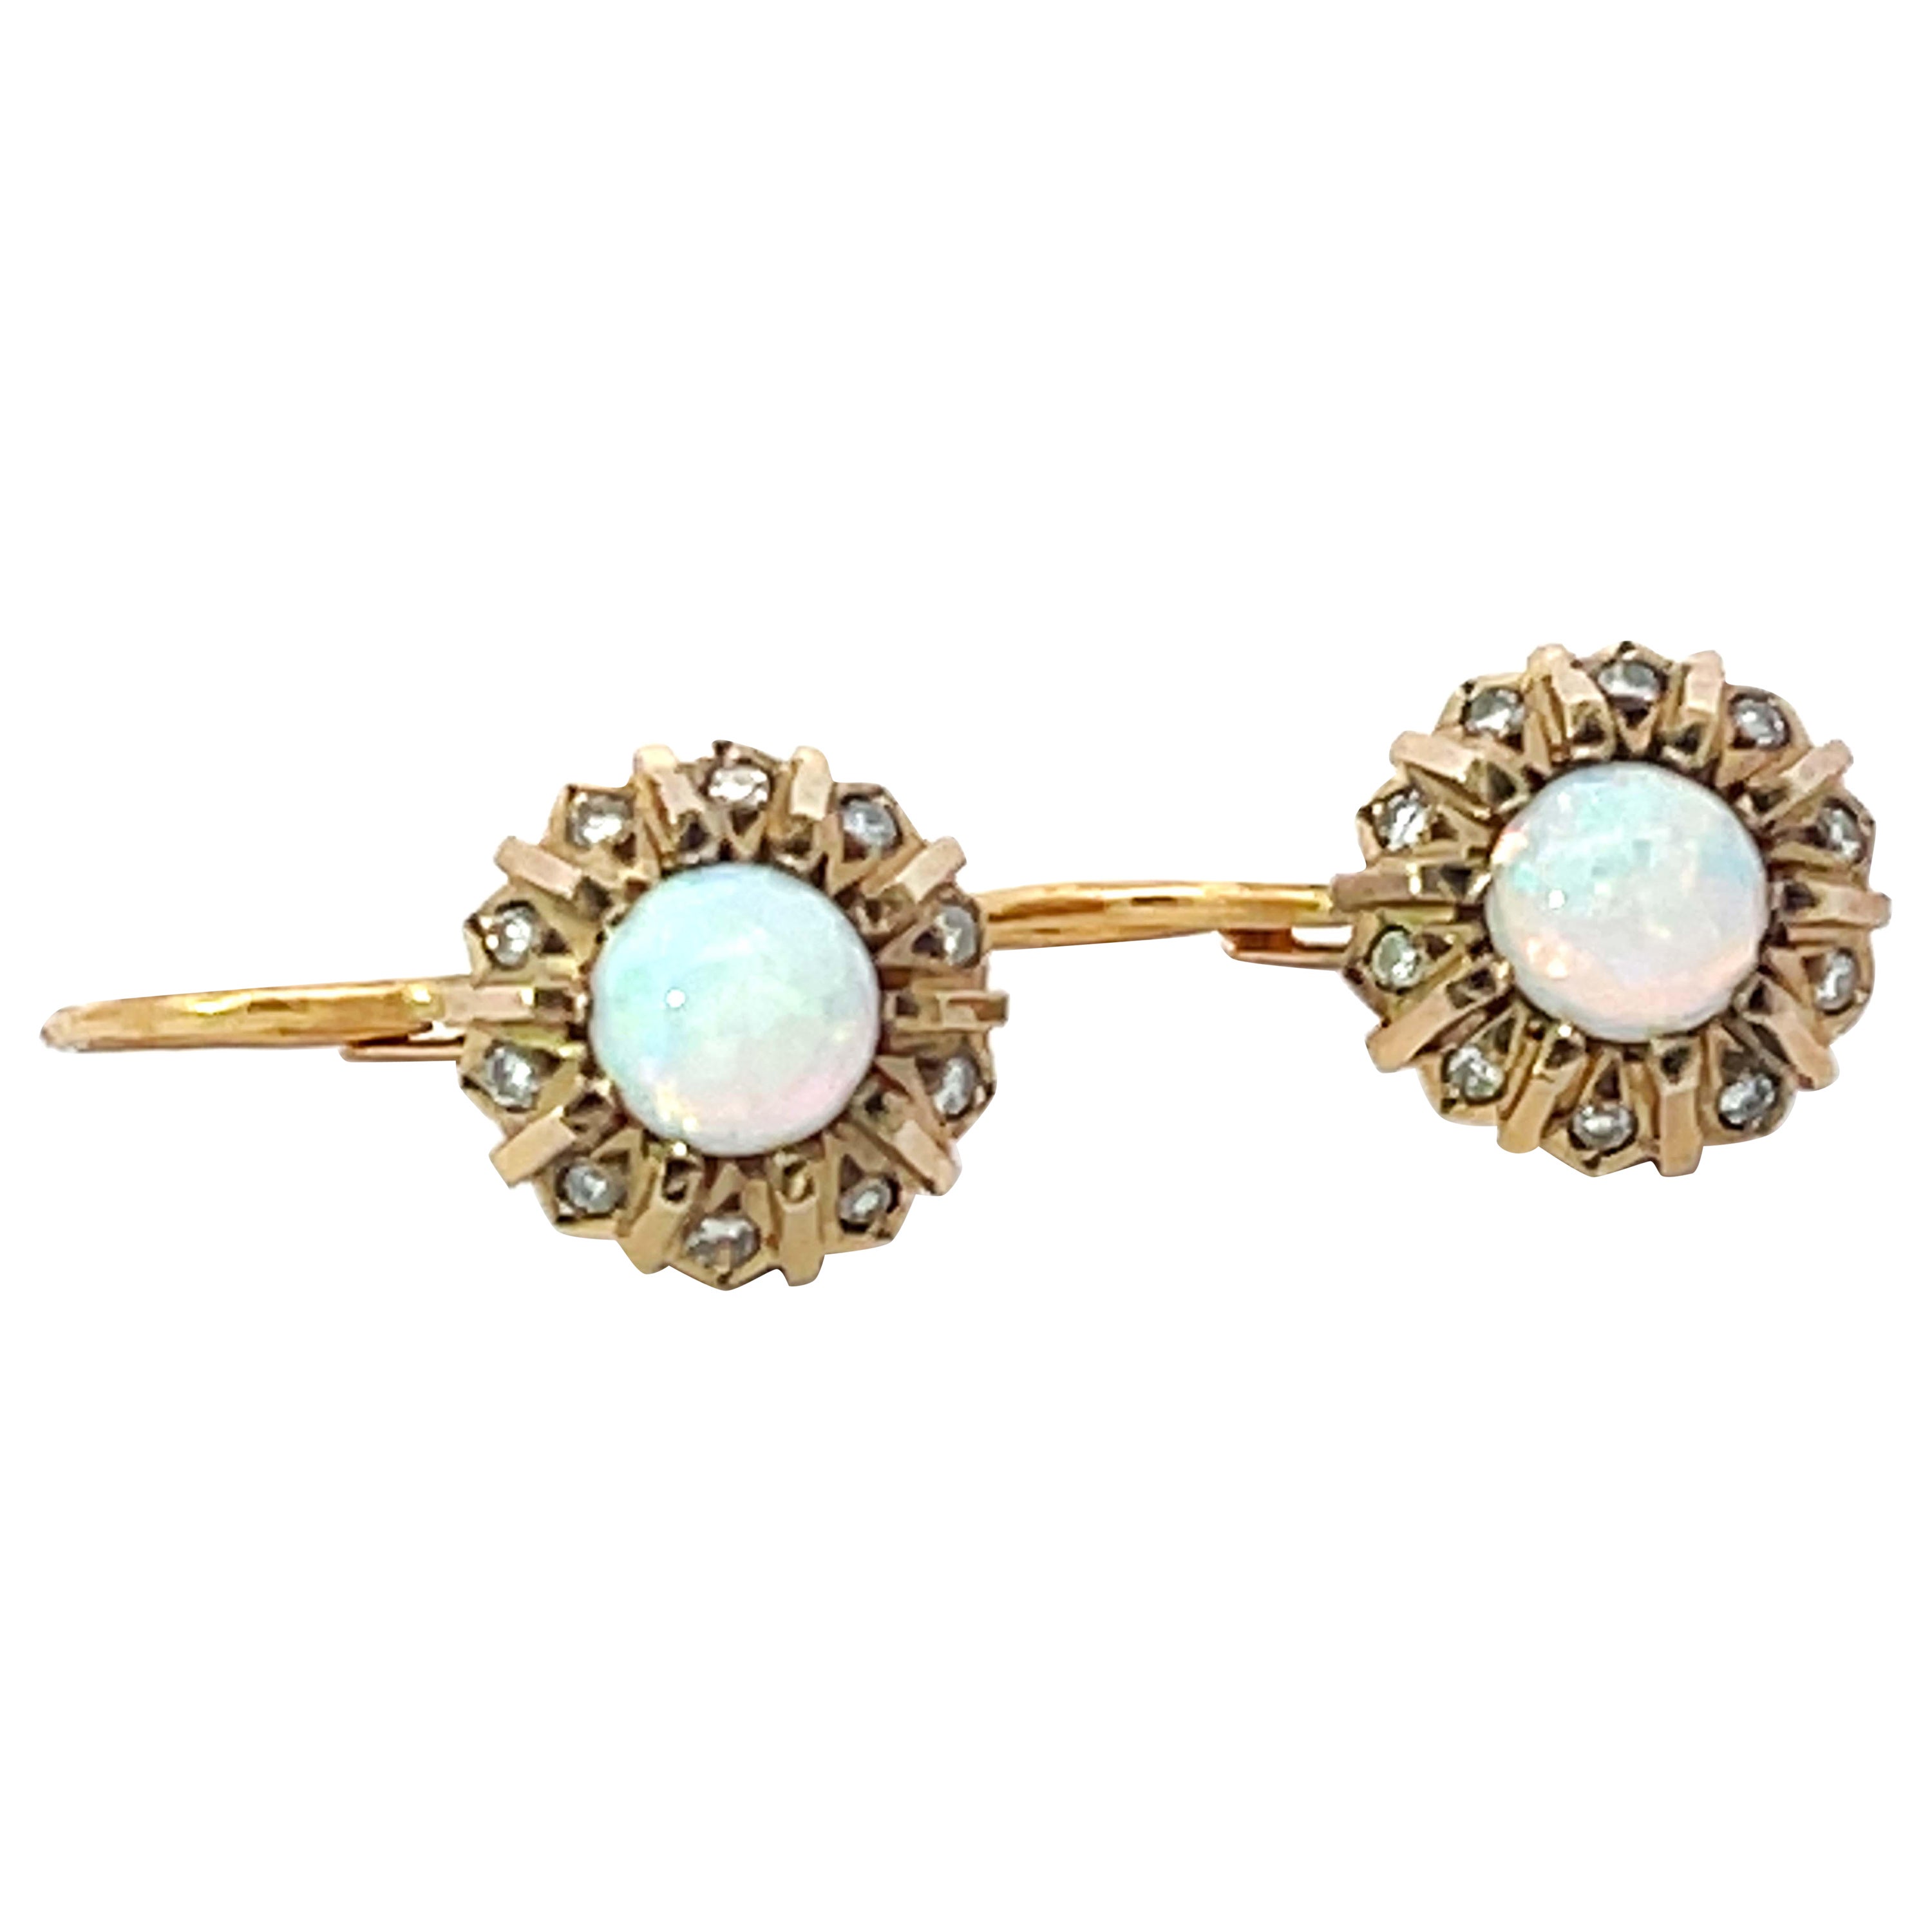 100 Year Old Antique Opal Diamond Earrings 14k Yellow Gold For Sale